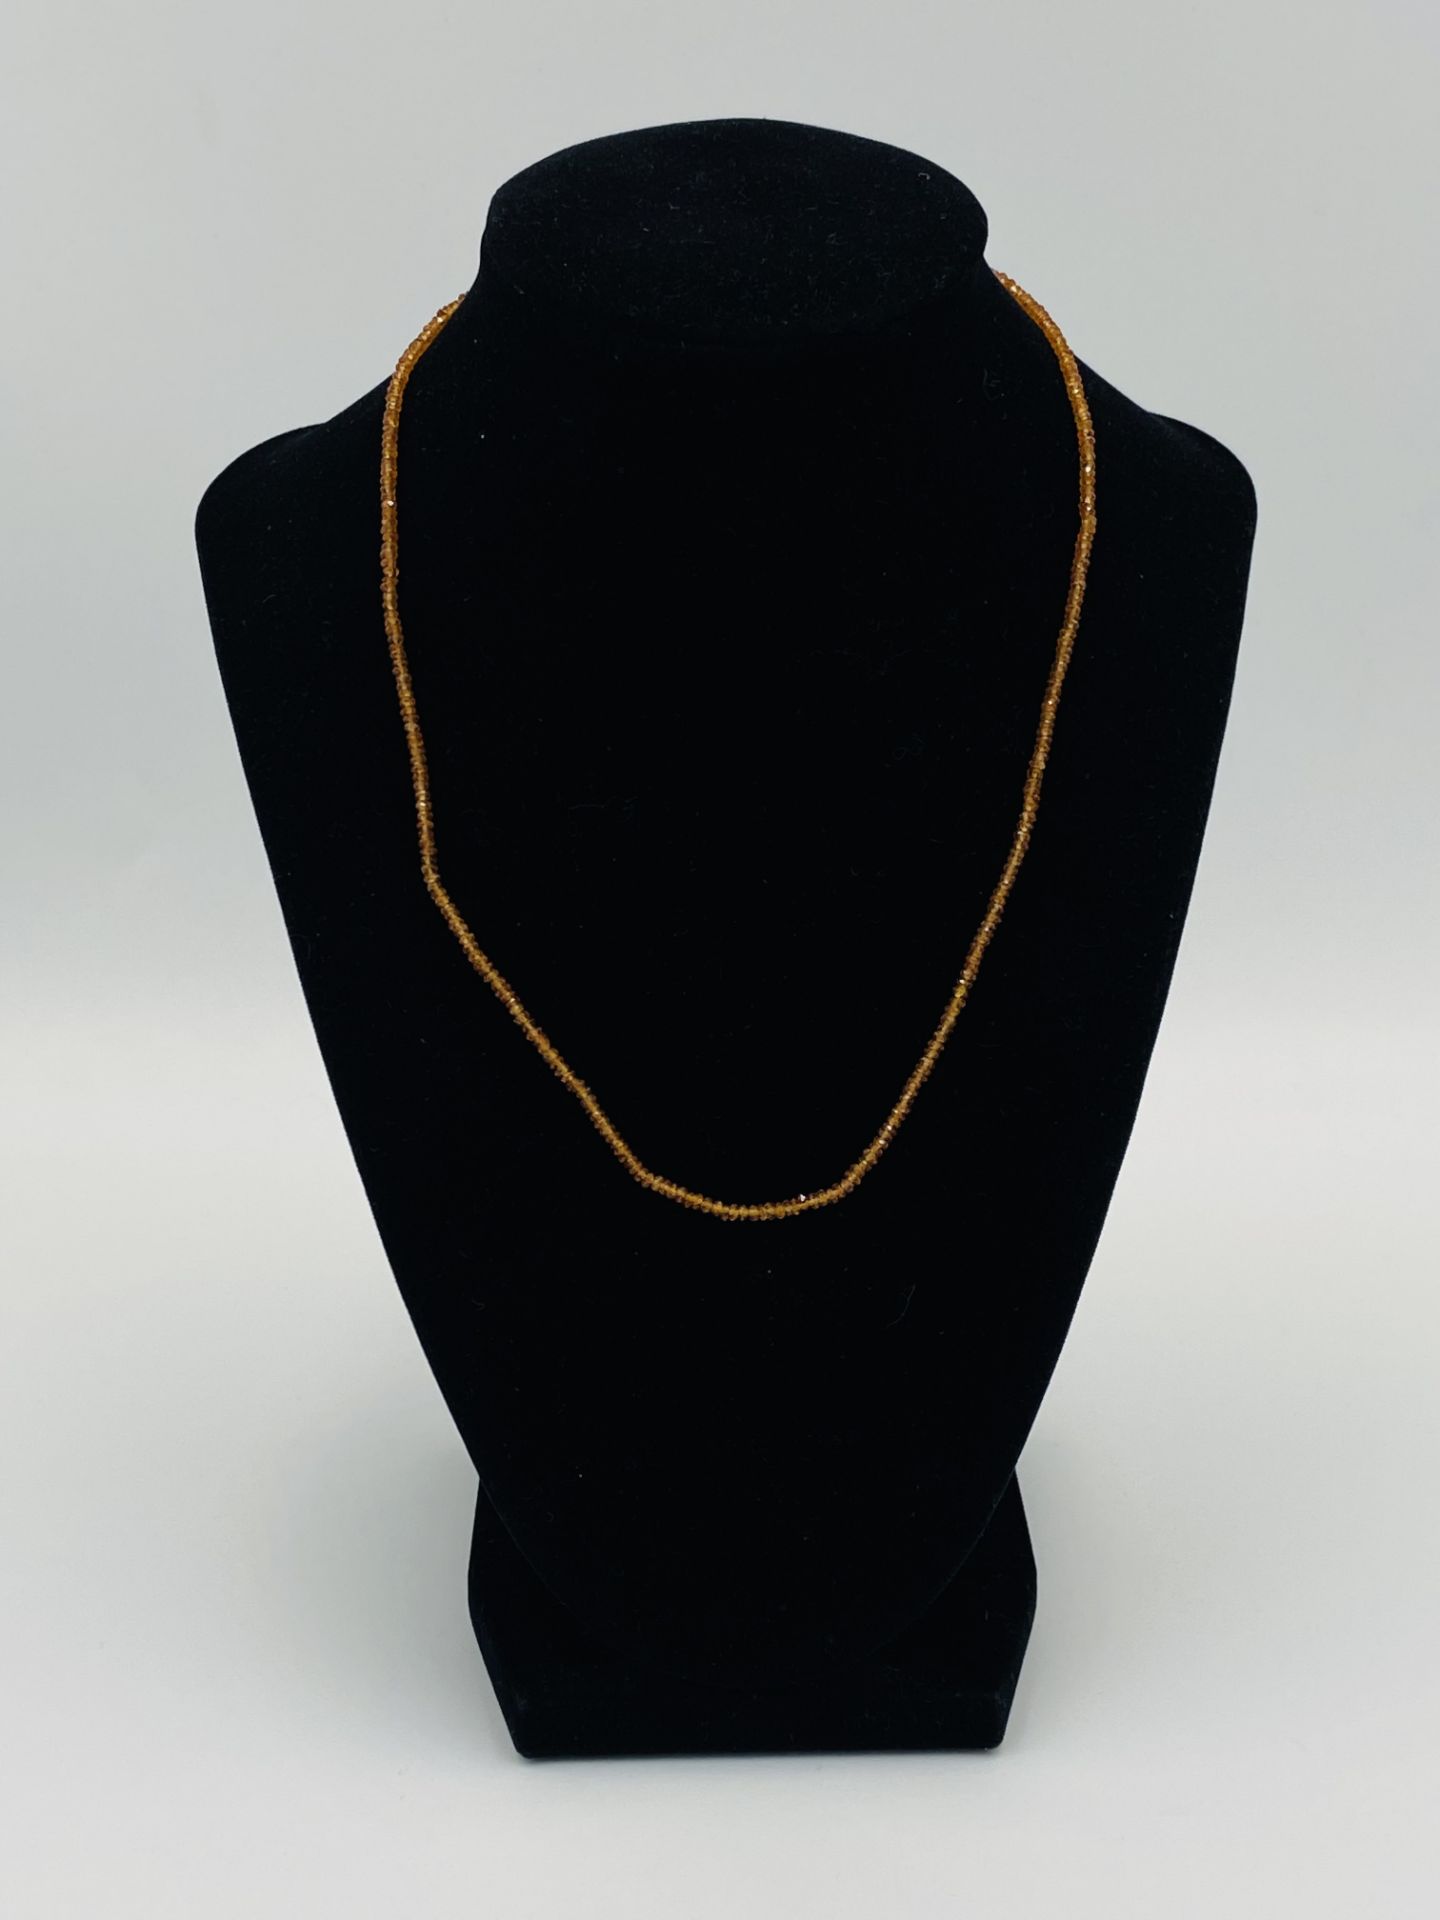 Two beaded necklaces with 14ct gold clasps - Image 3 of 6